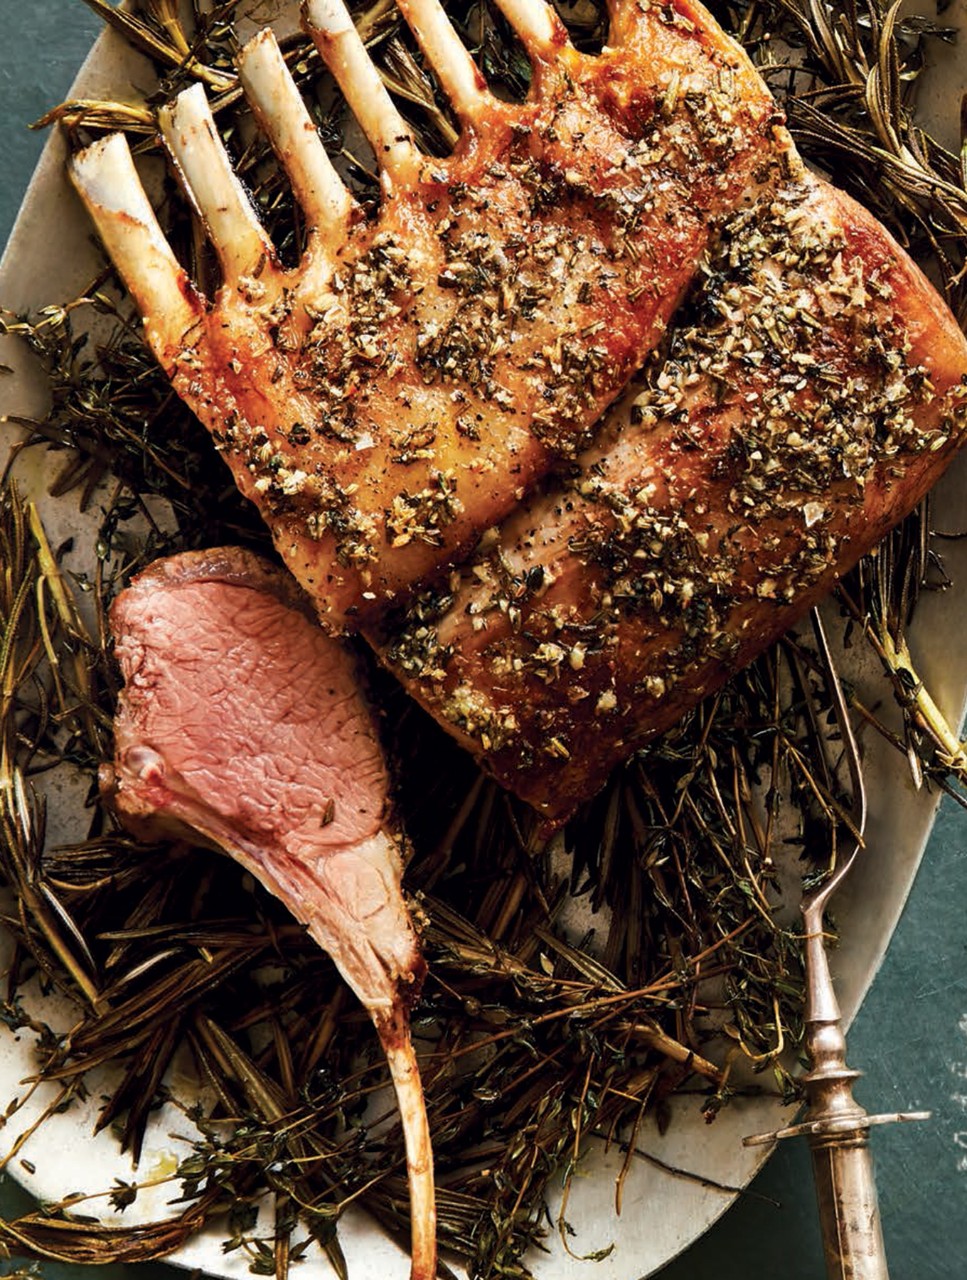 Lamb on a Bed of Herbs